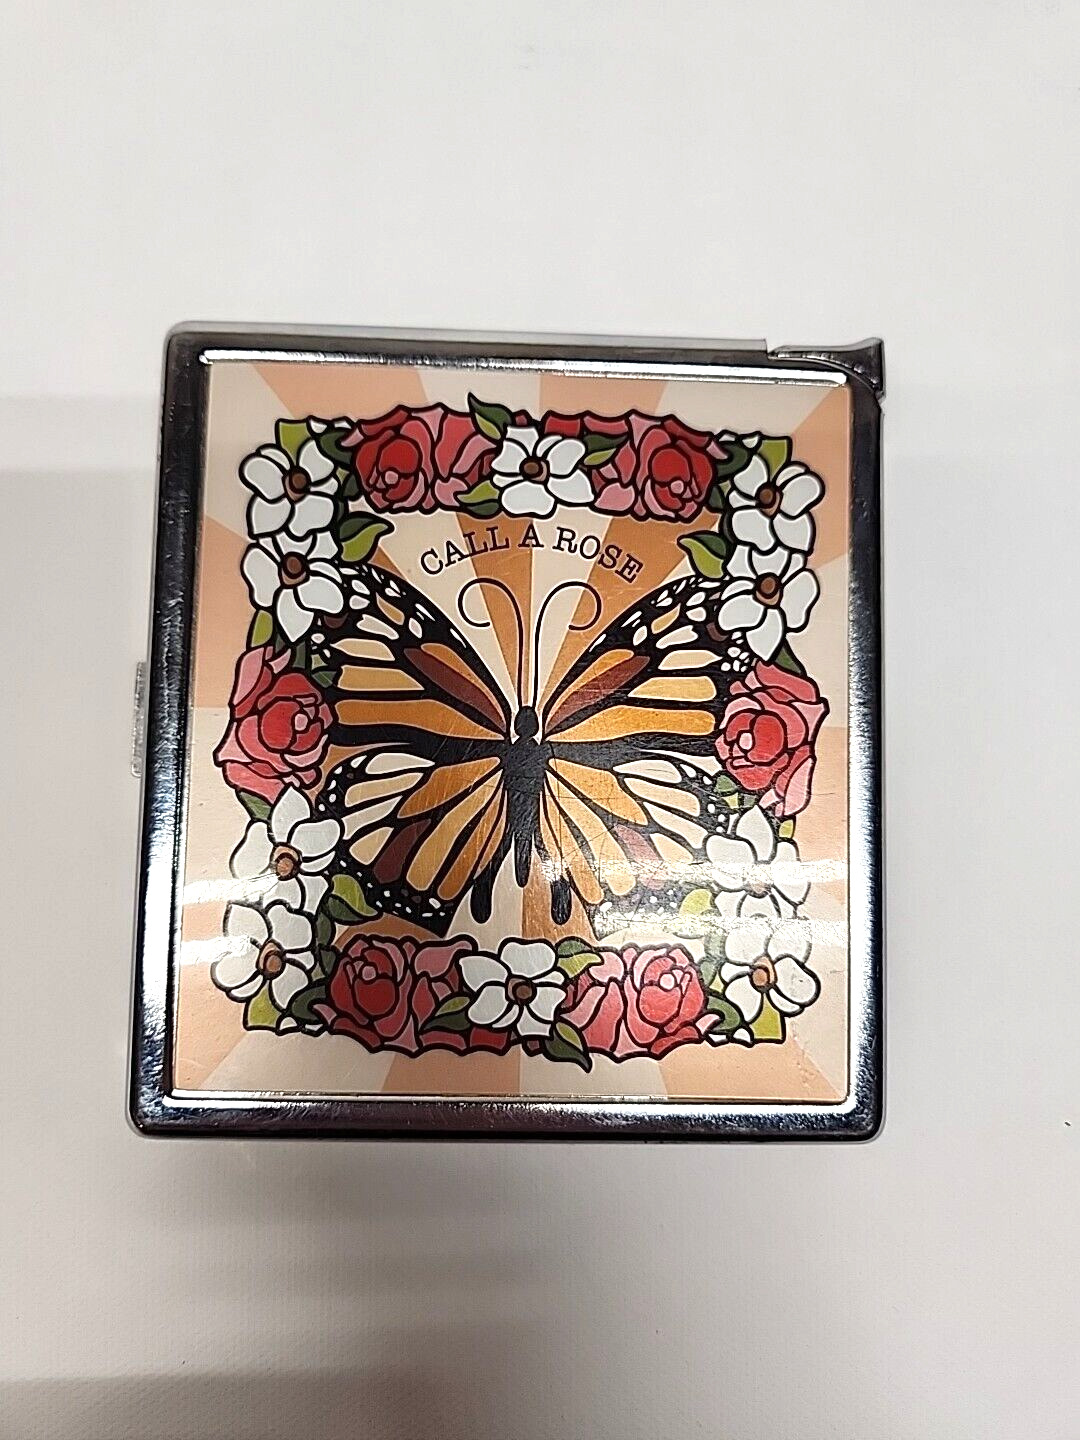 Call A Rose Metal Butterfly Rose Cigarette Case Holder with Refillable Lighter